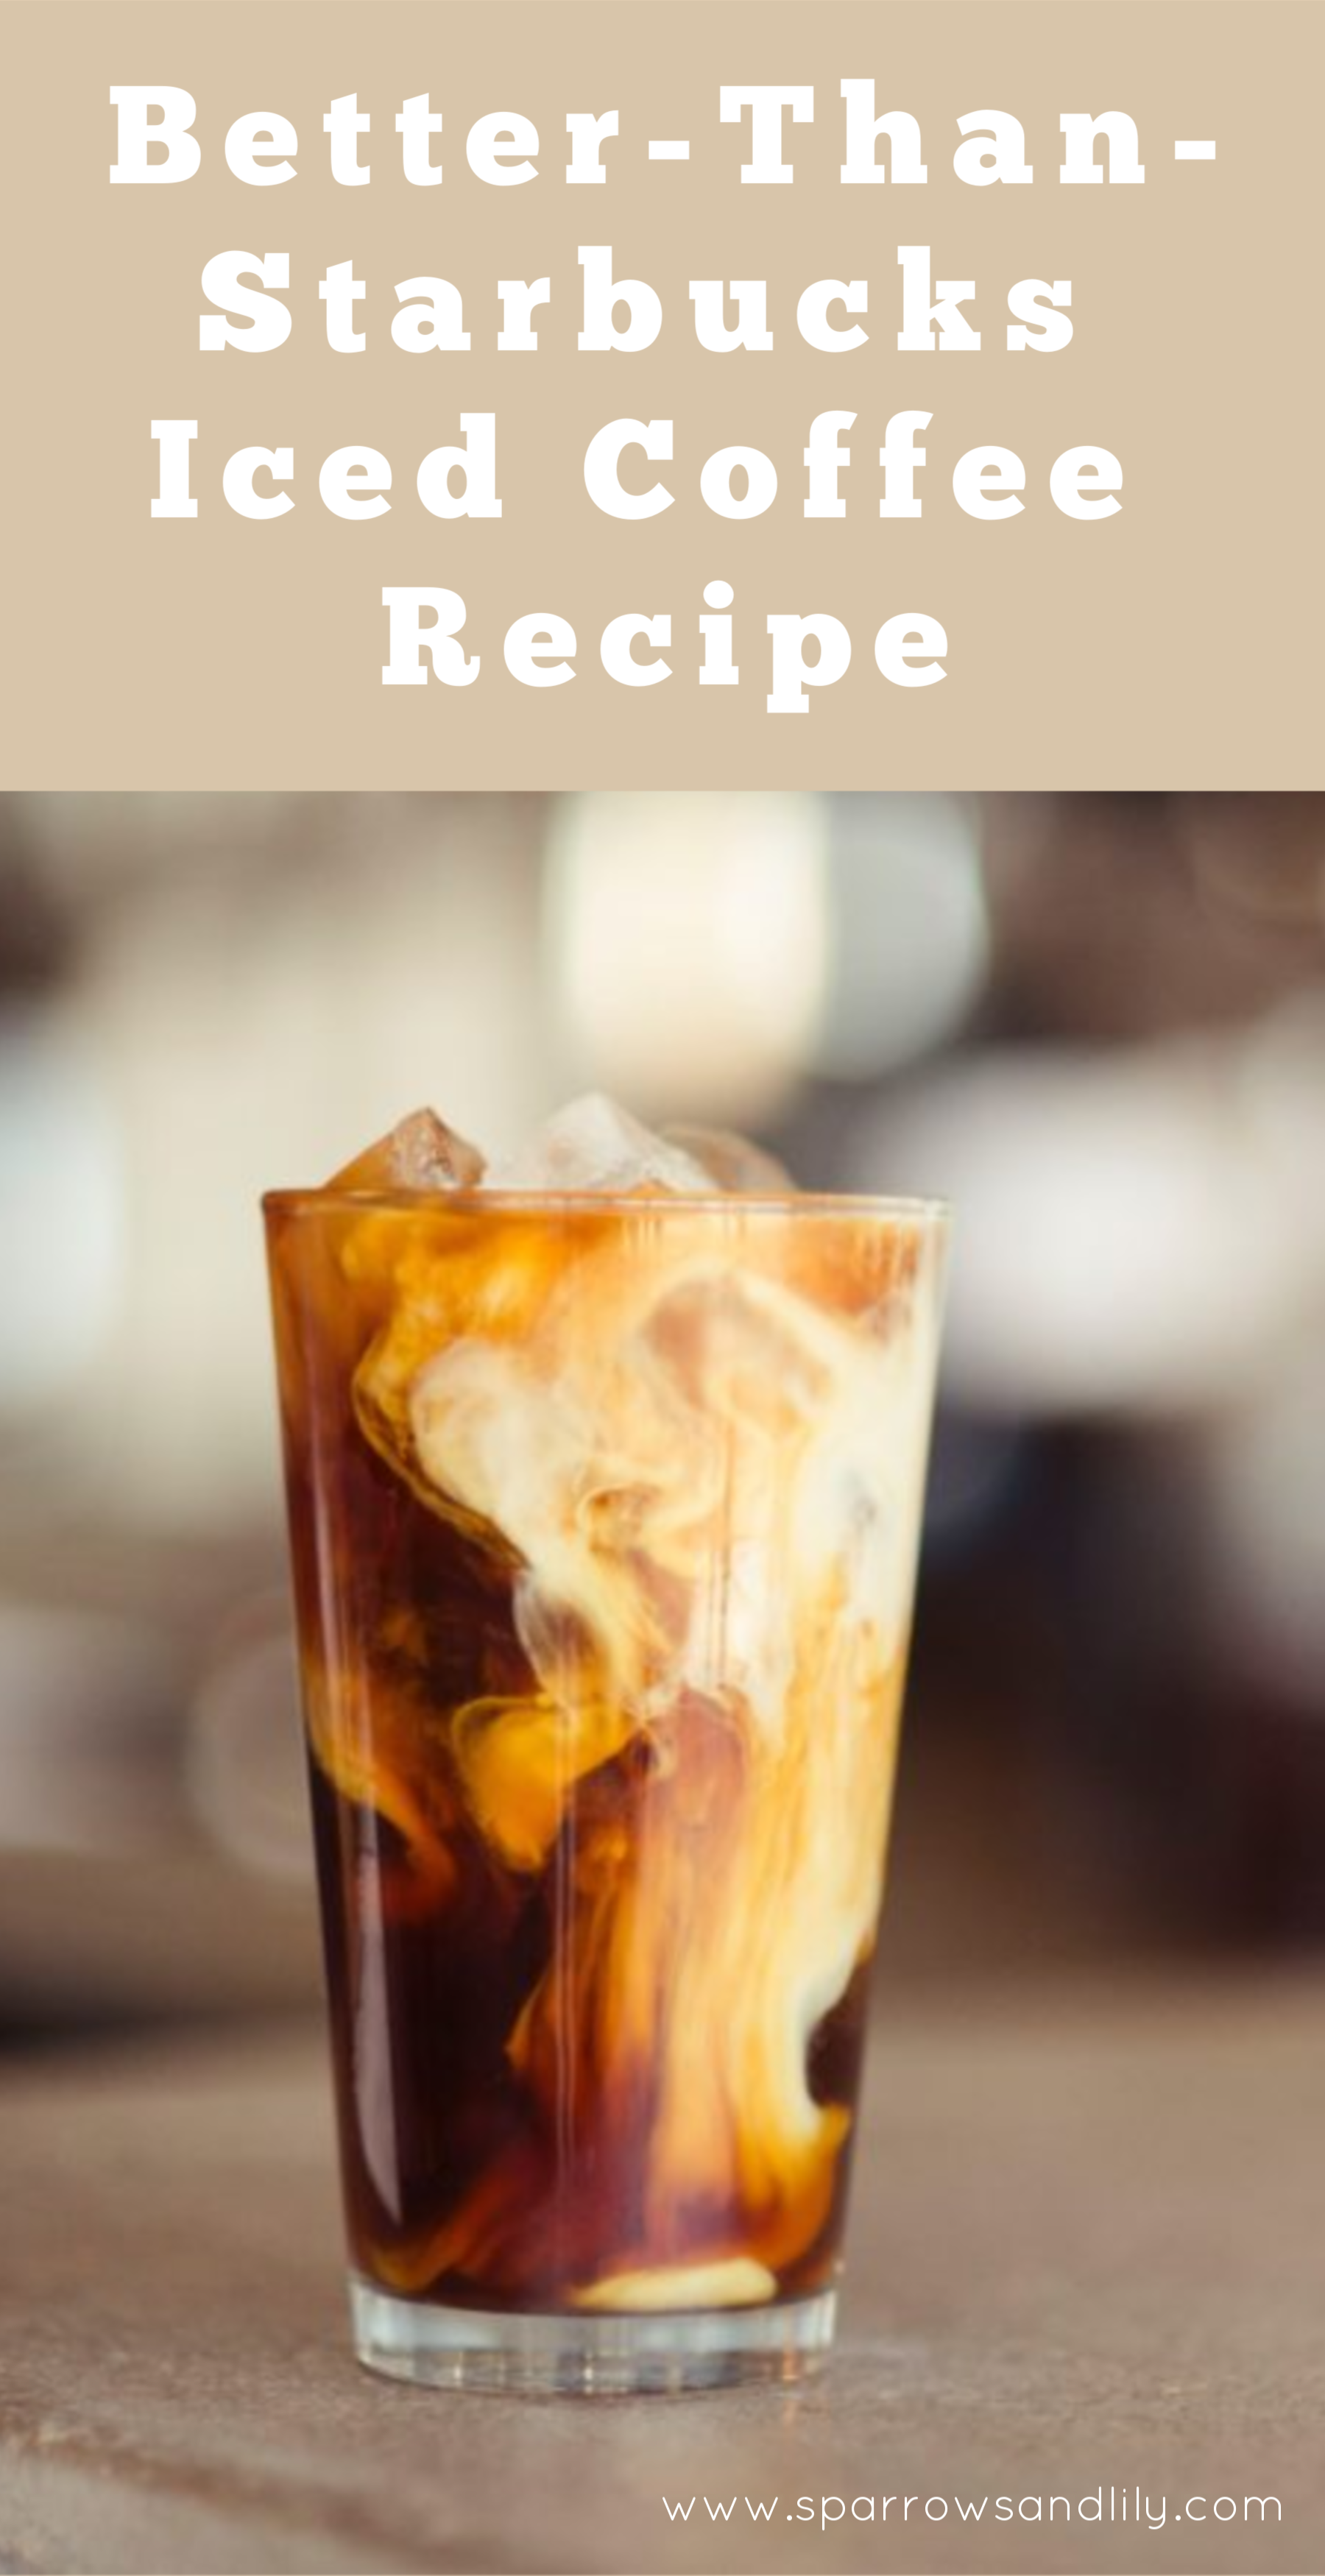 https://sparrowsandlily.com/wp-content/uploads/2019/04/Iced-Coffee-Pin-3.png